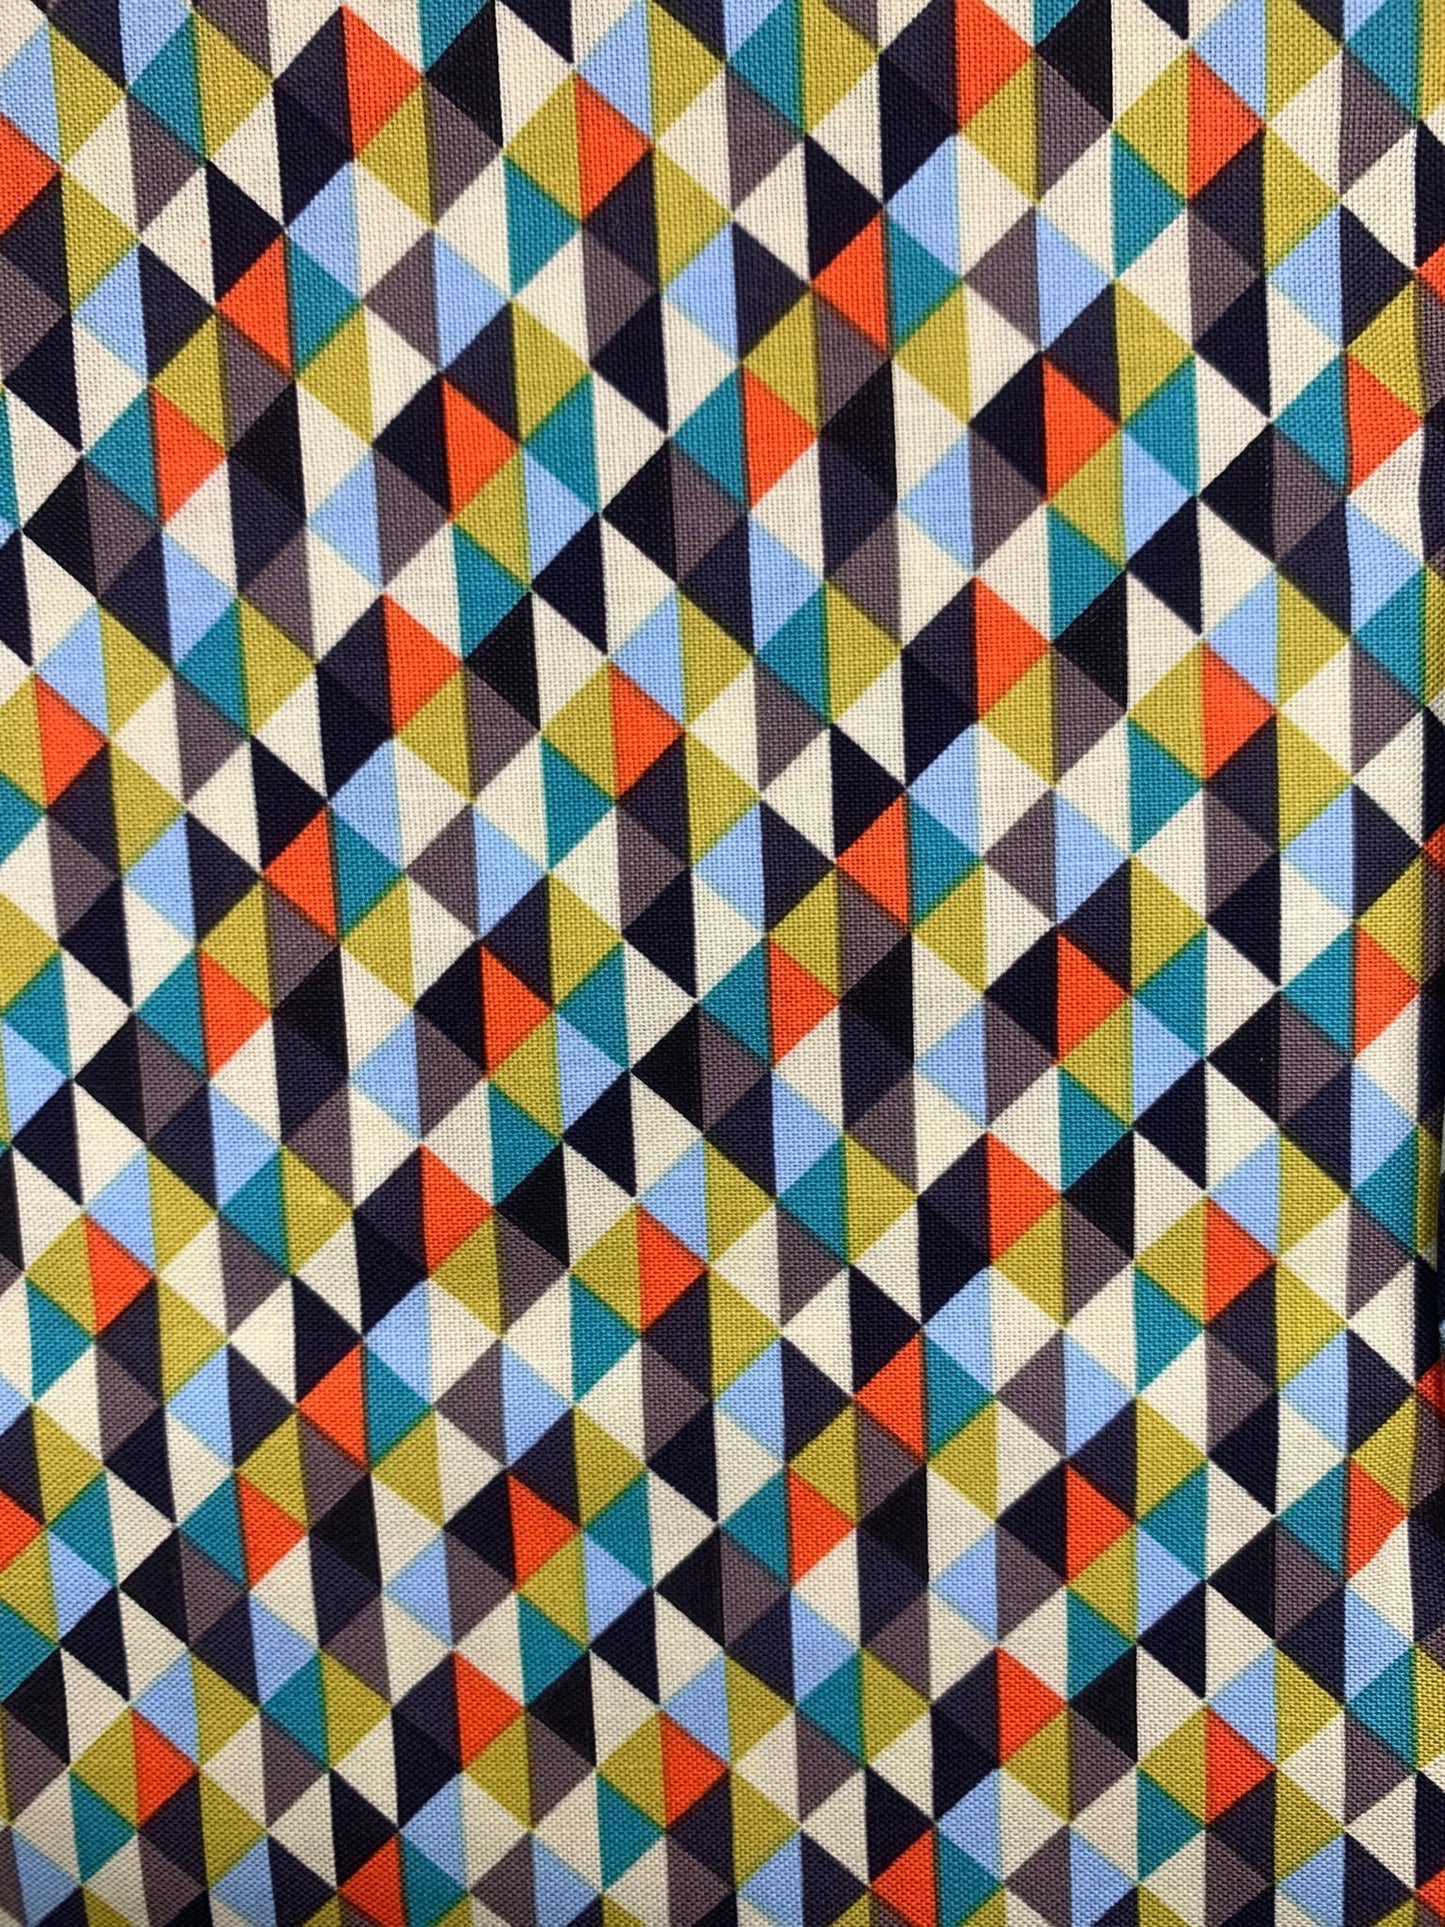 High Quality Quilting Fabric-- Hand Cut -Sold by the 1/2 Yard- Michael Miller Fabrics-Time Warp collection-100% Cotton Fabric. Color: Dirt